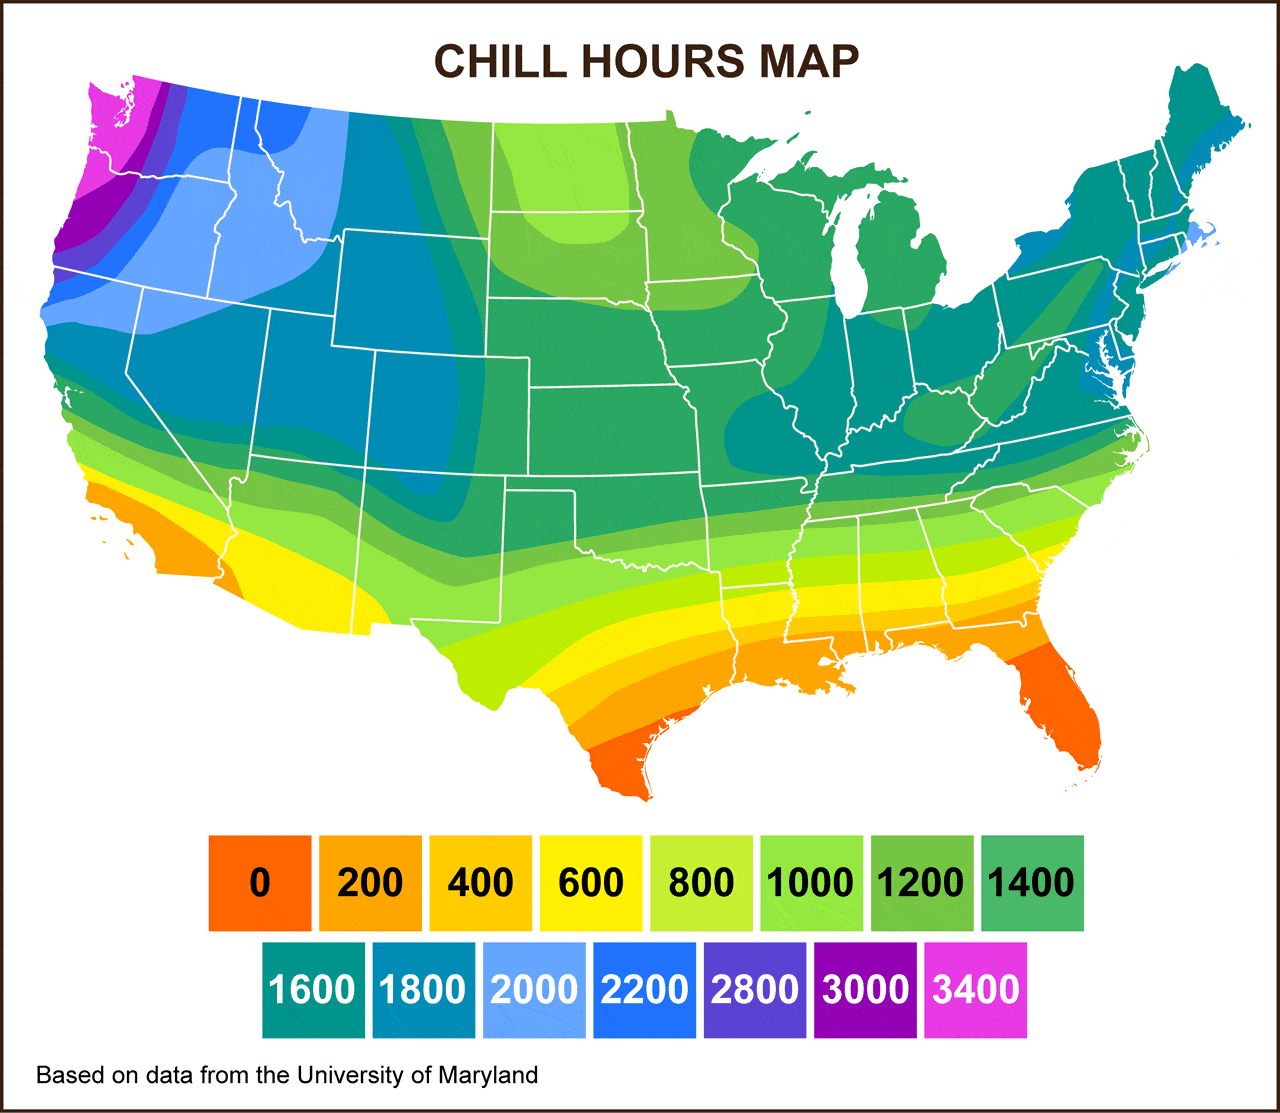 A map of the United States, showing the chill hours by region. The map is a range of purple, blue, green, yellow, to orange in color, showing the colder regions to the warmer ones. There is a table below reflecting the colors by chill hours, orange being zero chill hours and the coldest purple being the most chill hours with 3400.